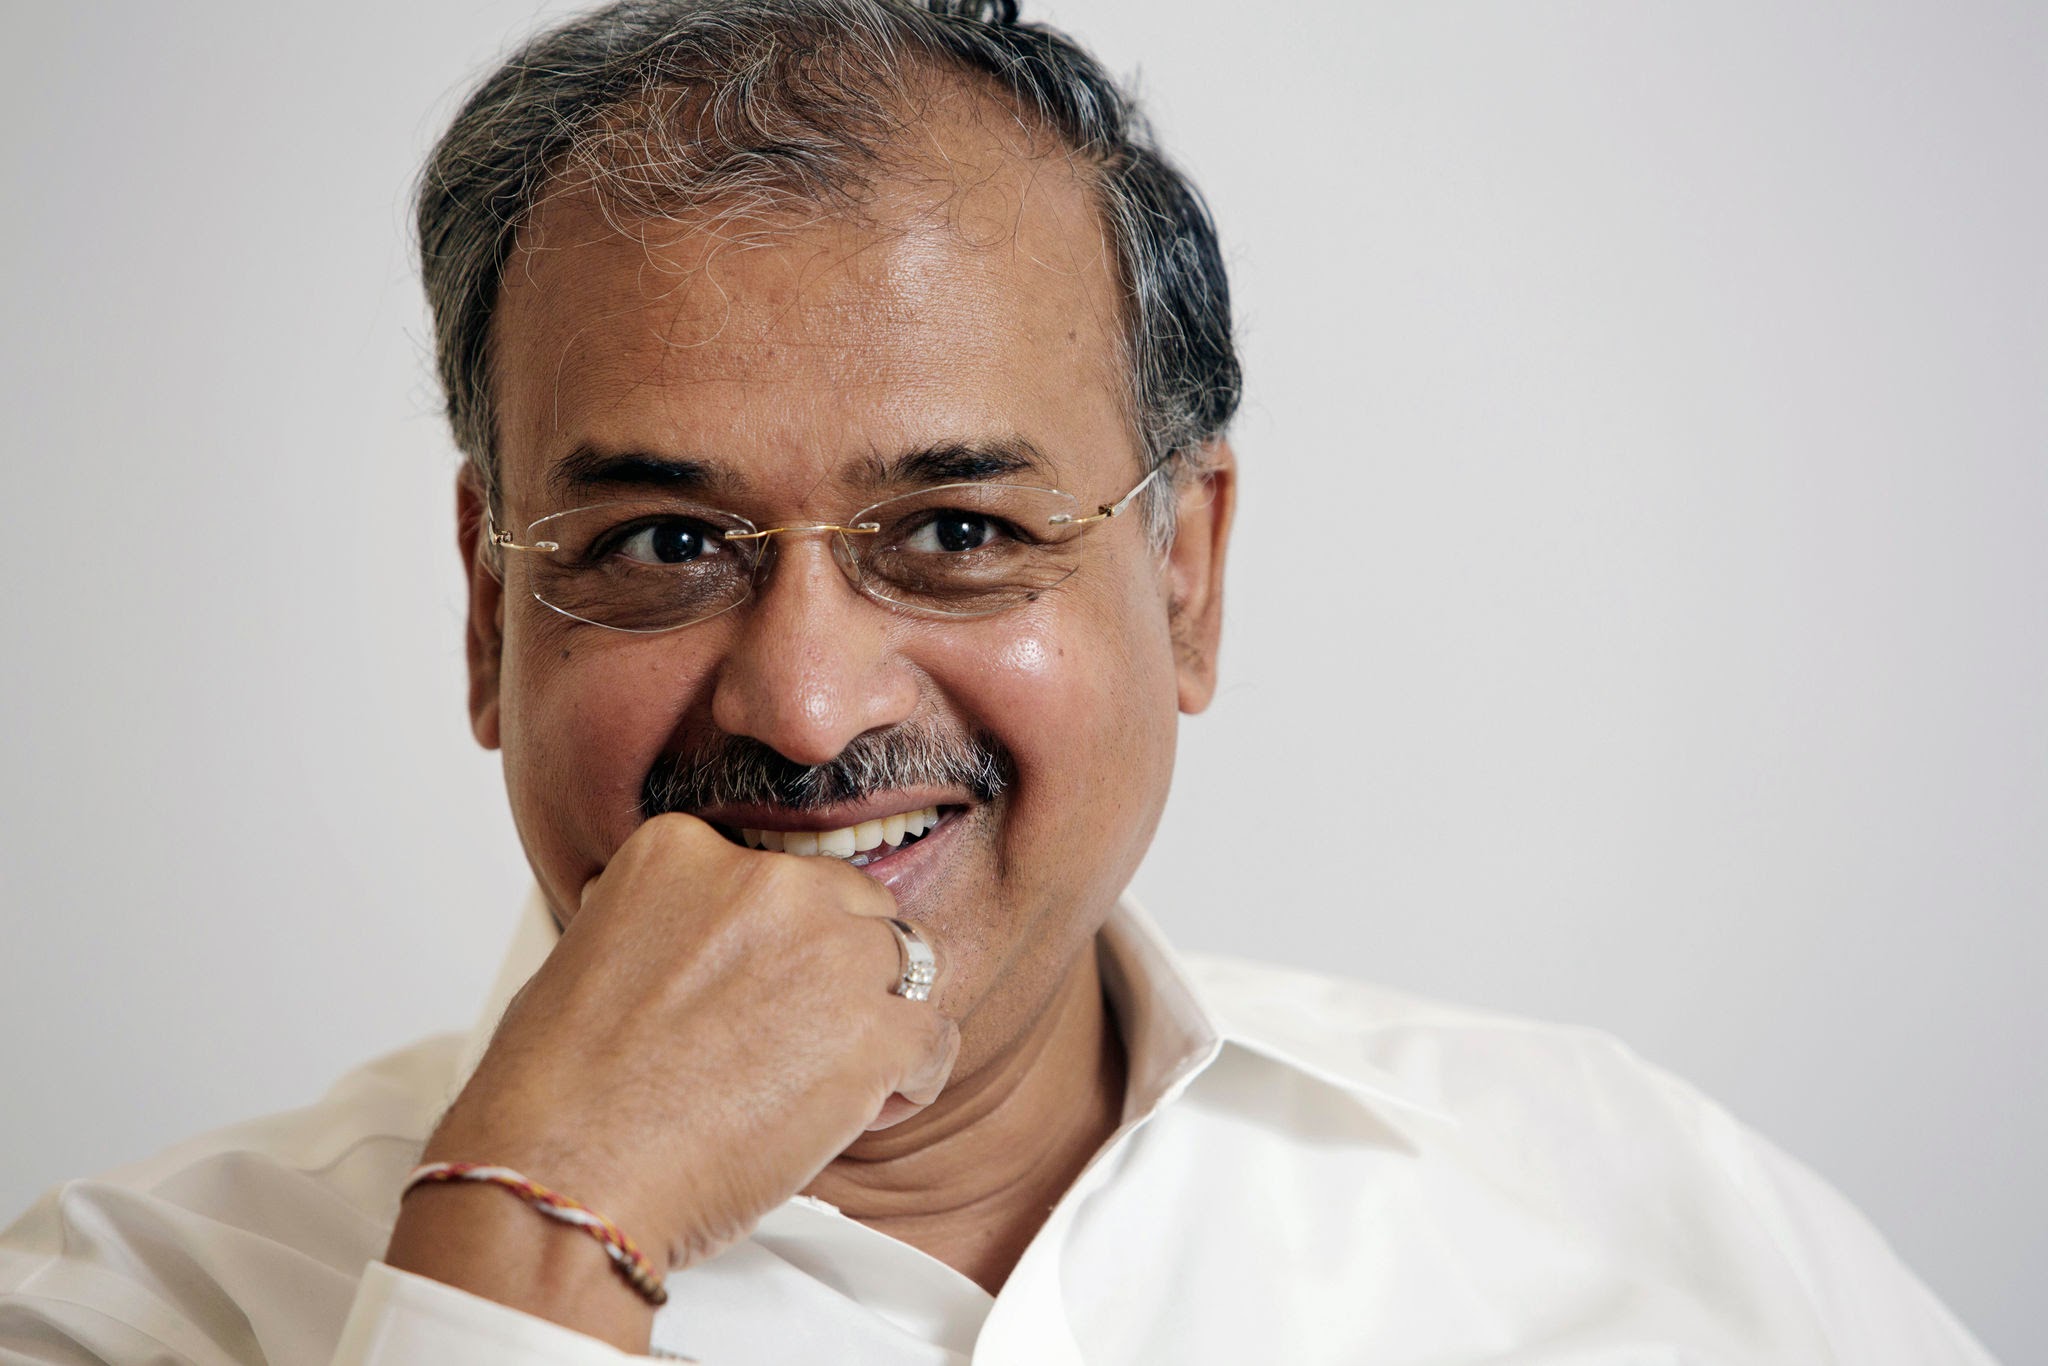  Biography of Dilip Shanghvi, Early life of Dilip Shanghvi, Sun Pharmaceuticals founder, Indian pharmaceutical industry, Success story of Dilip Shanghvi,Sun Pharmaceuticals acquisitions, Dilip Shanghvi's net worth, Contributions of Sun Pharmaceuticals, Philanthropic activities by Dilip Shanghvi, Leadership of Dilip Shanghvi,Buy Sun Pharmaceuticals stock, Sun Pharma's financial performance, Sun Pharma's product portfolio, Investing in pharmaceutical companies, Sun Pharma's competitive advantage